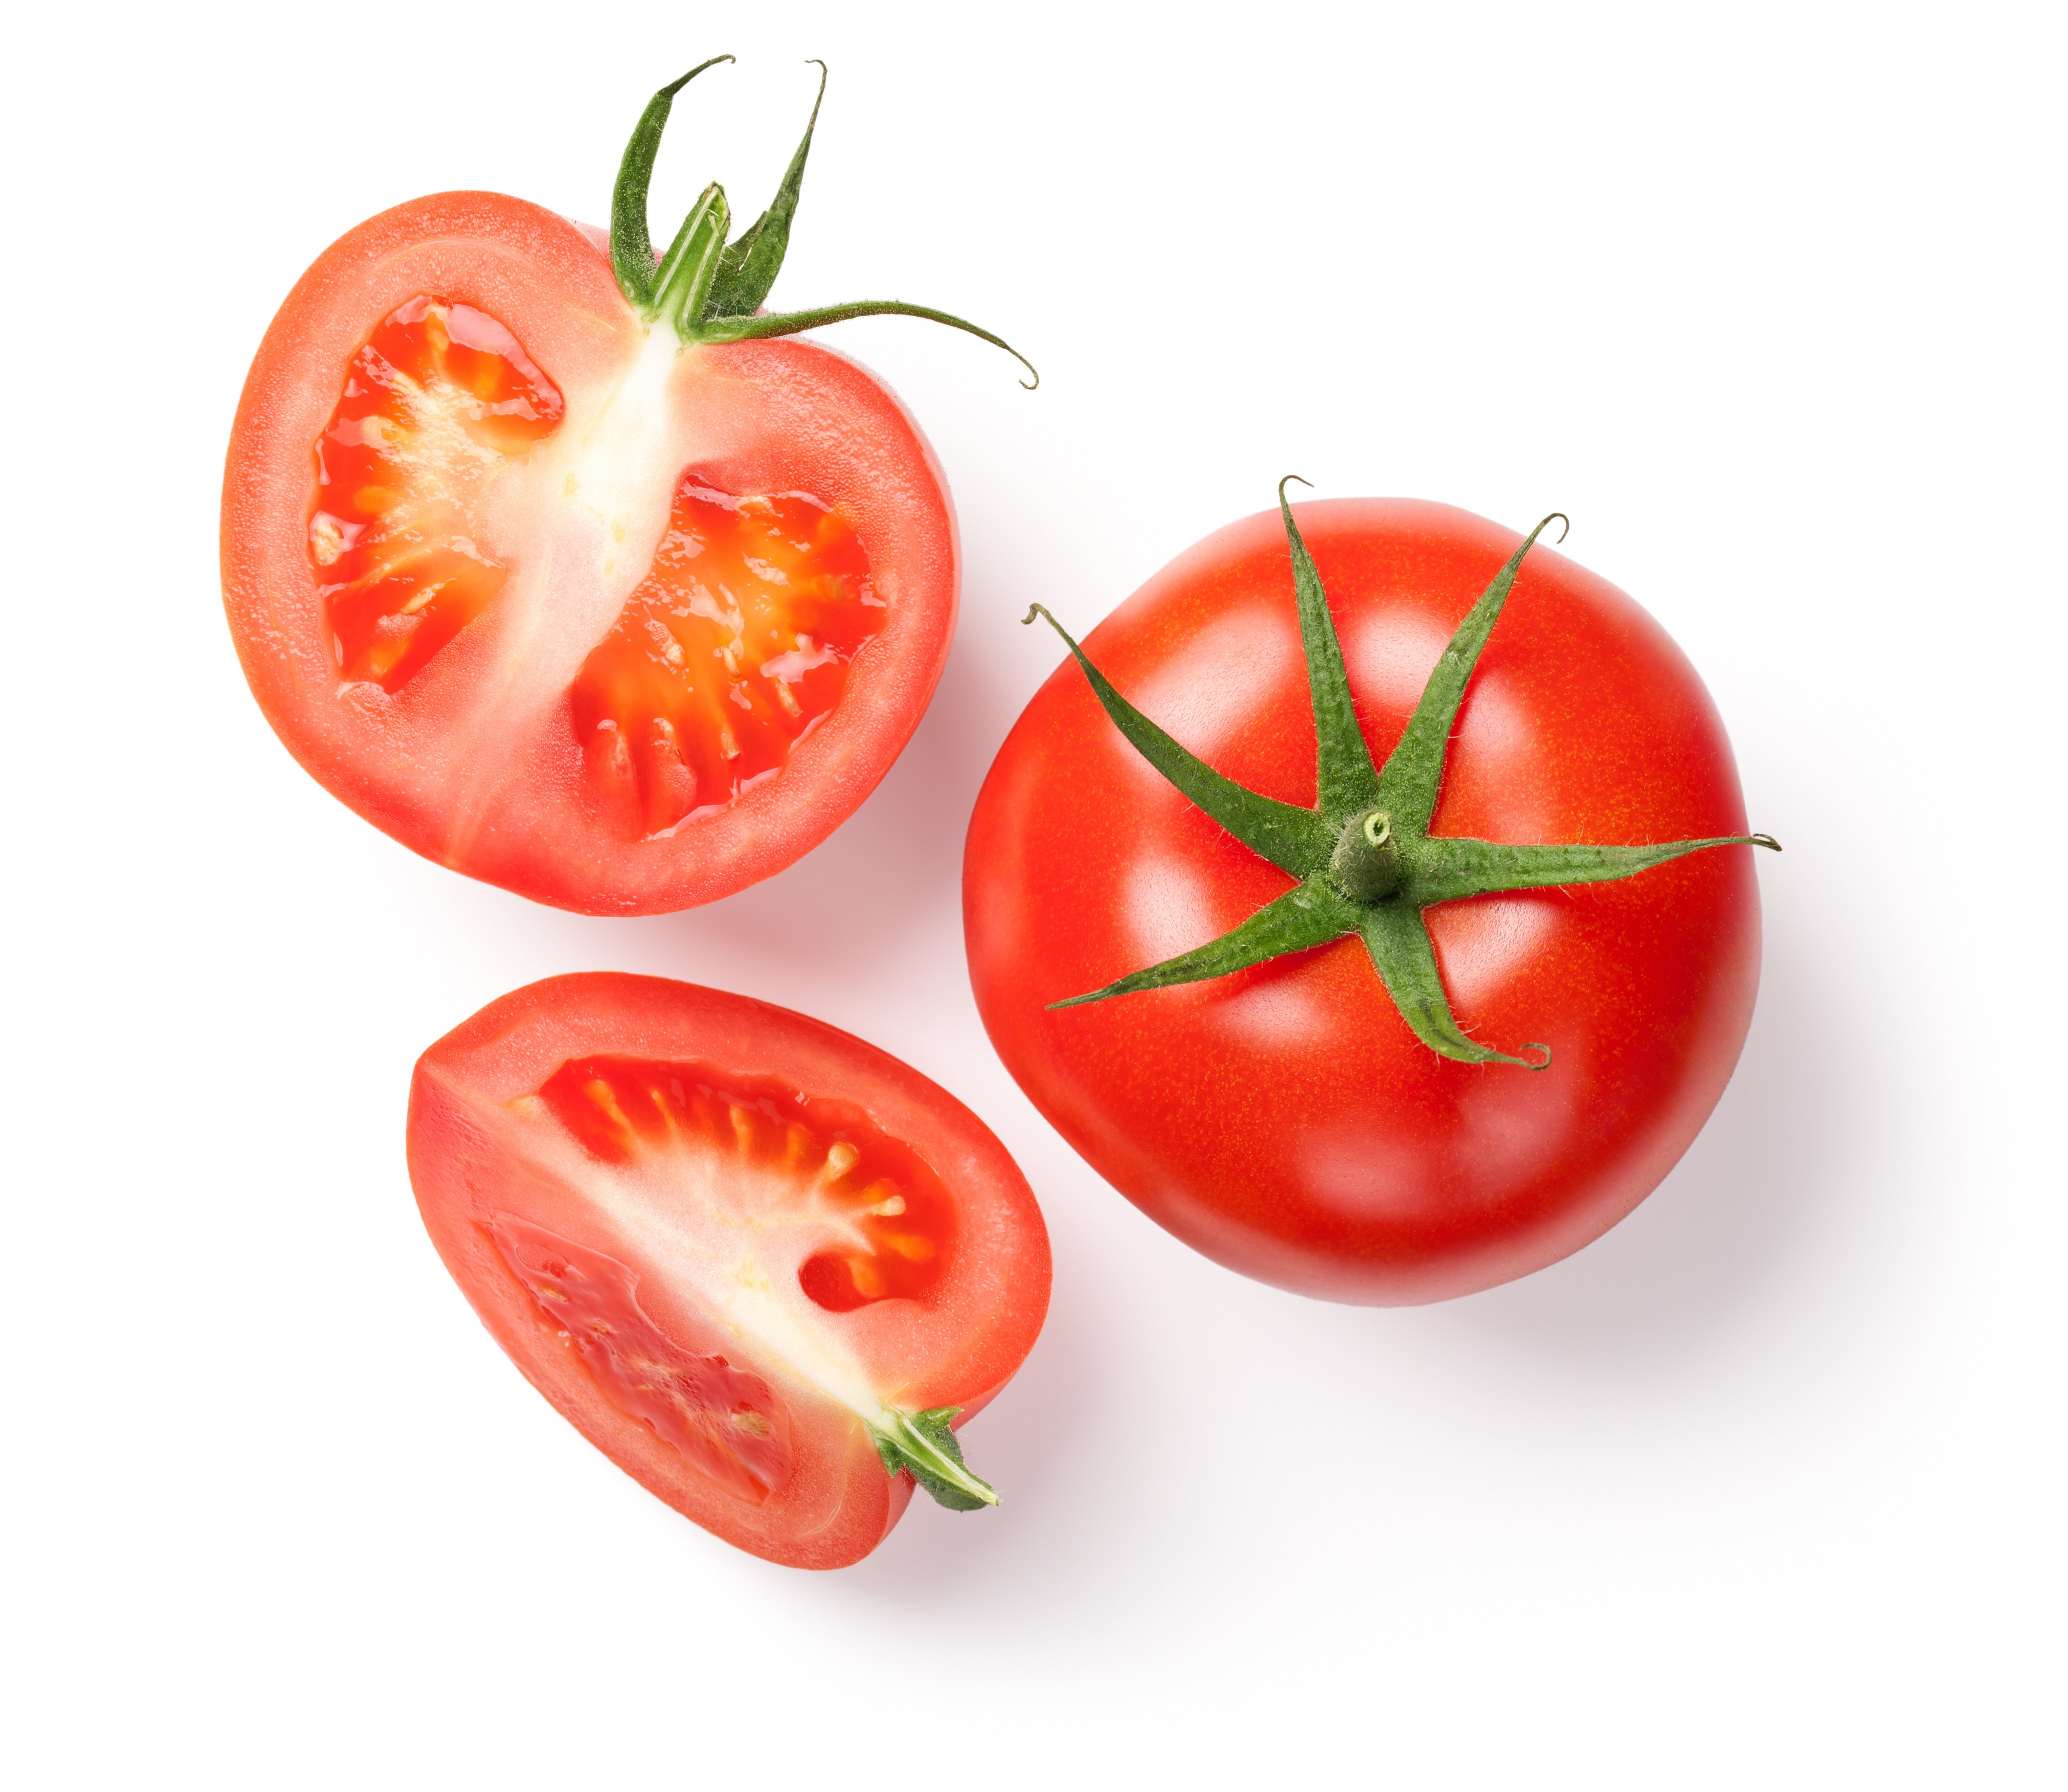 tomatoes - what to compost